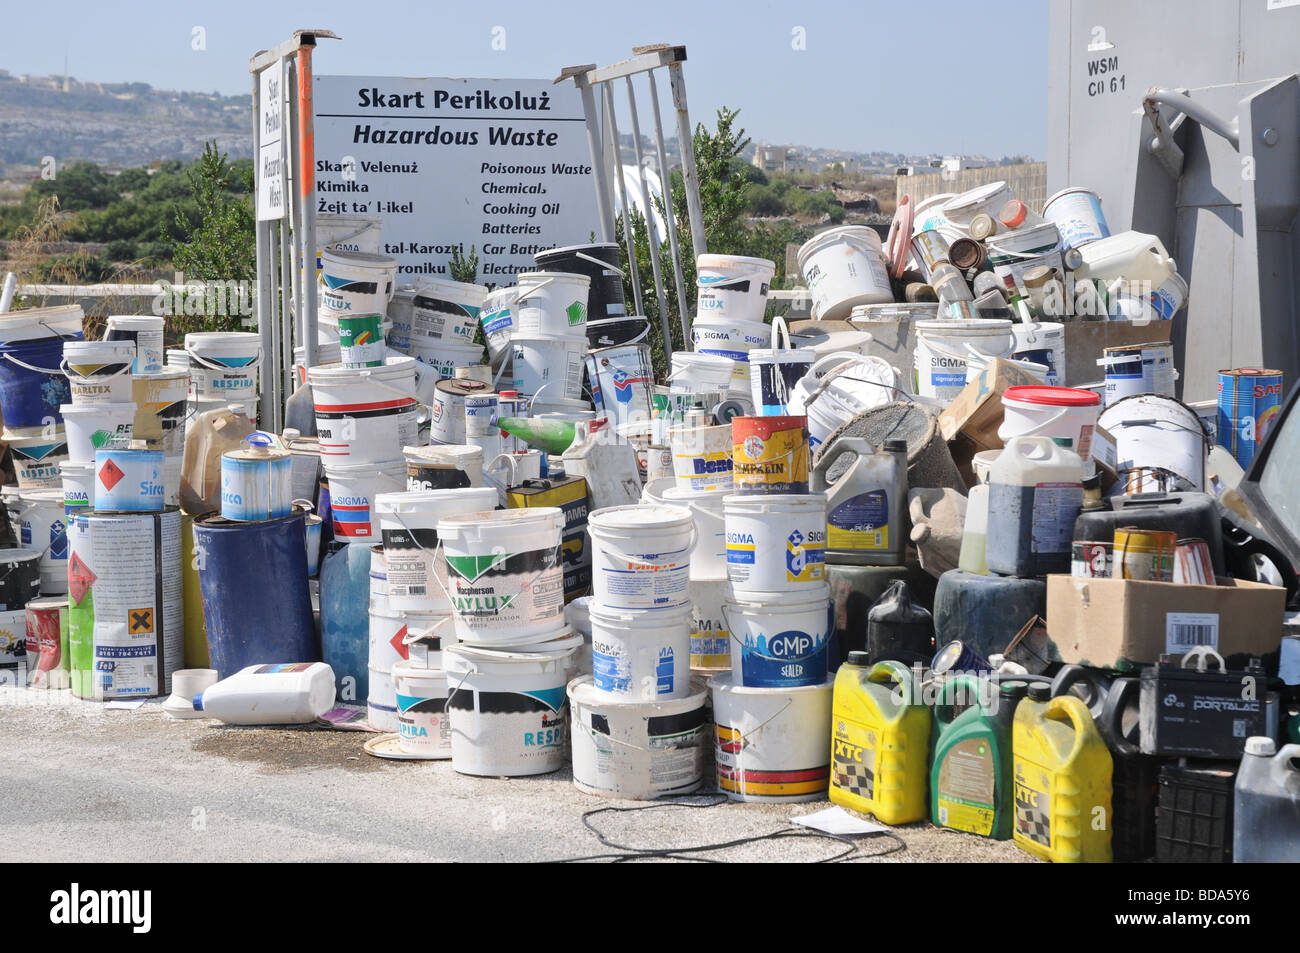 Paint buckets and fuel containers ready to be recycled at a waste management plant in Malta. Hazardous waste directive Stock Photo